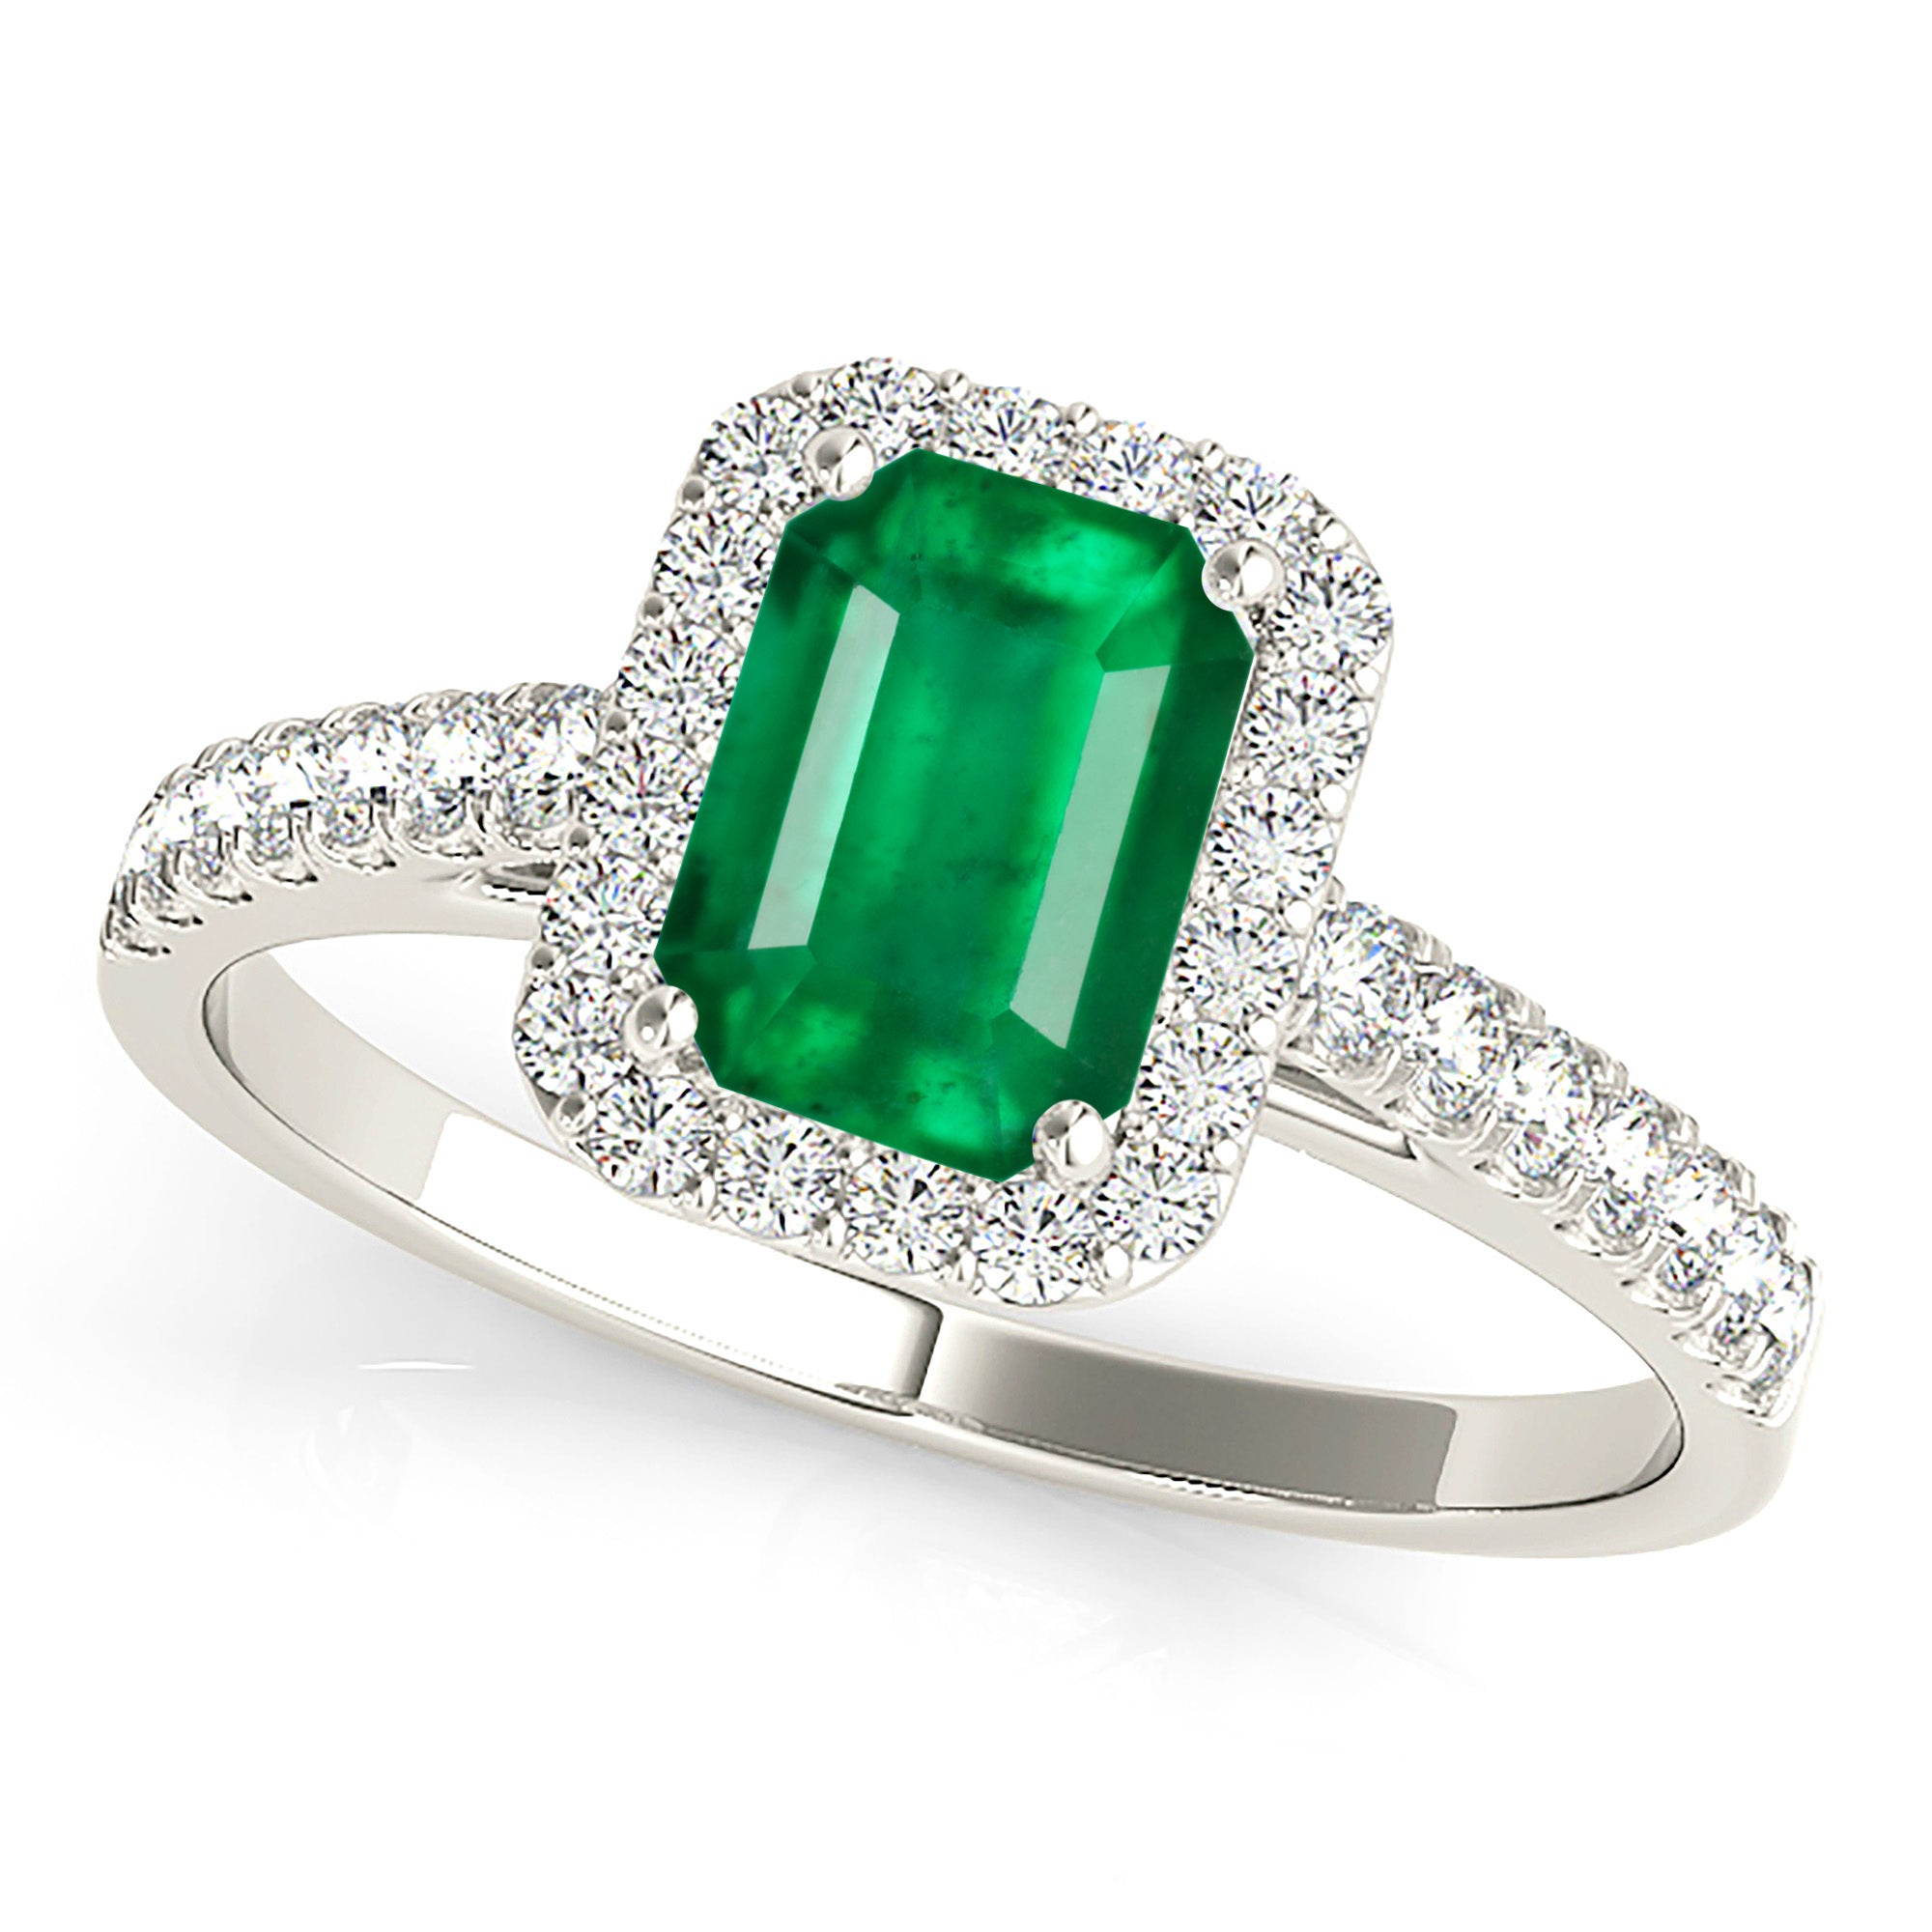 1.00 ct. Genuine Emerald Ring With 0.25 ctw. Diamond Halo and Diamond Delicate Shank-in 14K/18K White, Yellow, Rose Gold and Platinum - Christmas Jewelry Gift -VIRABYANI